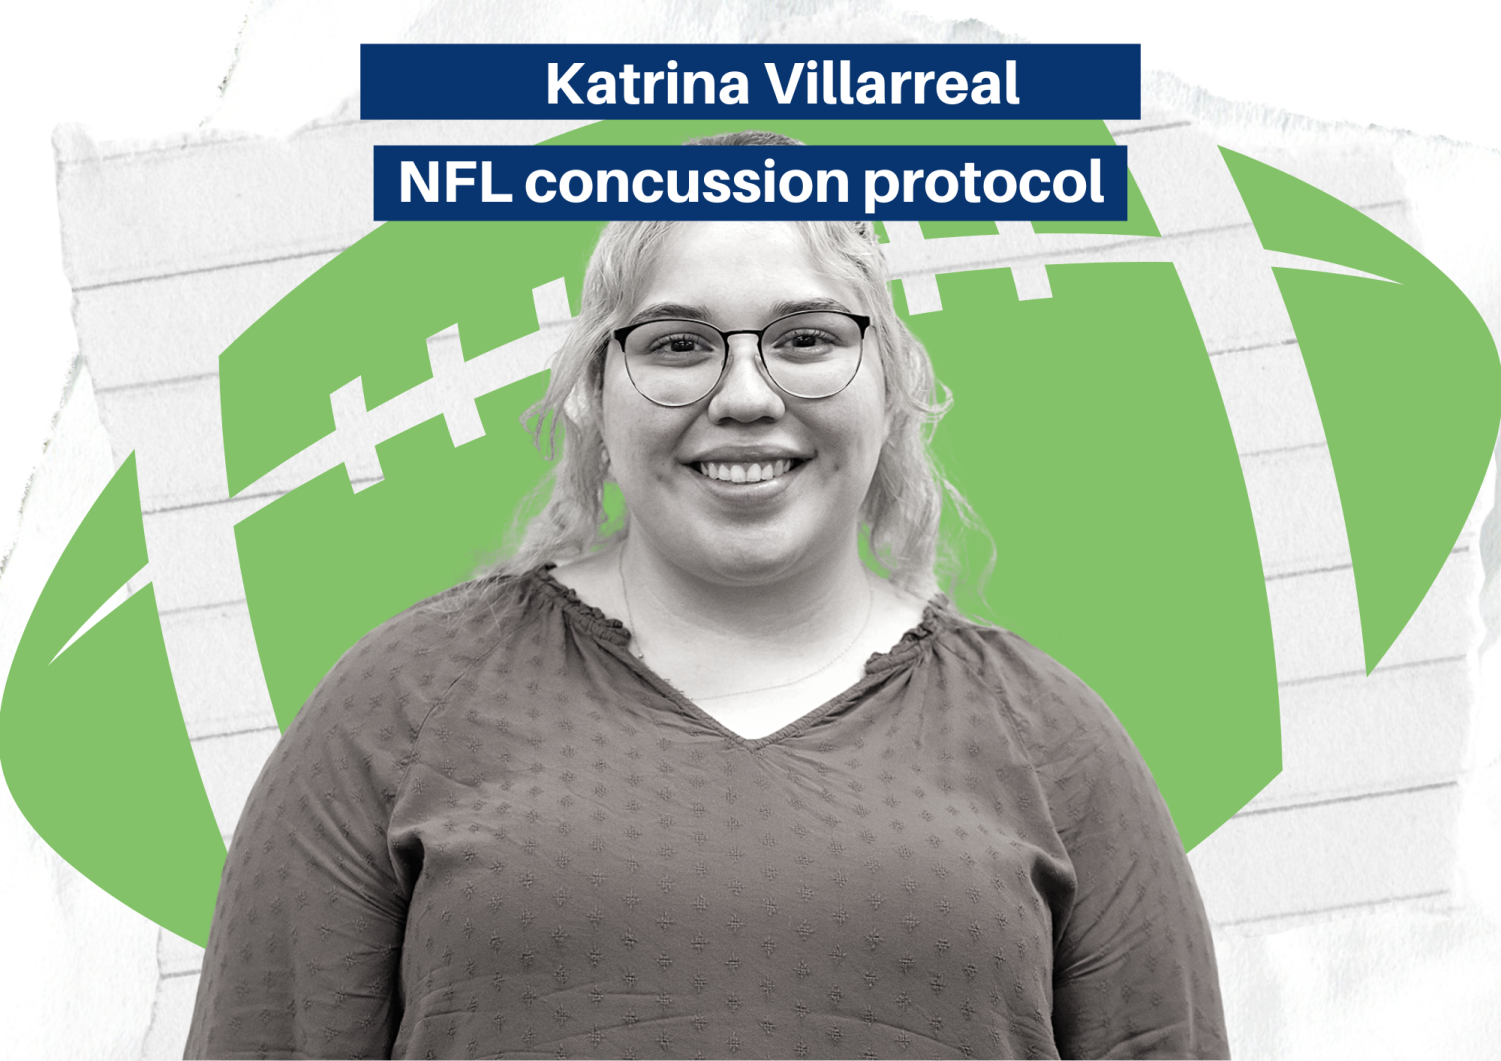 NFL/NFLPA making changes to concussion protocol